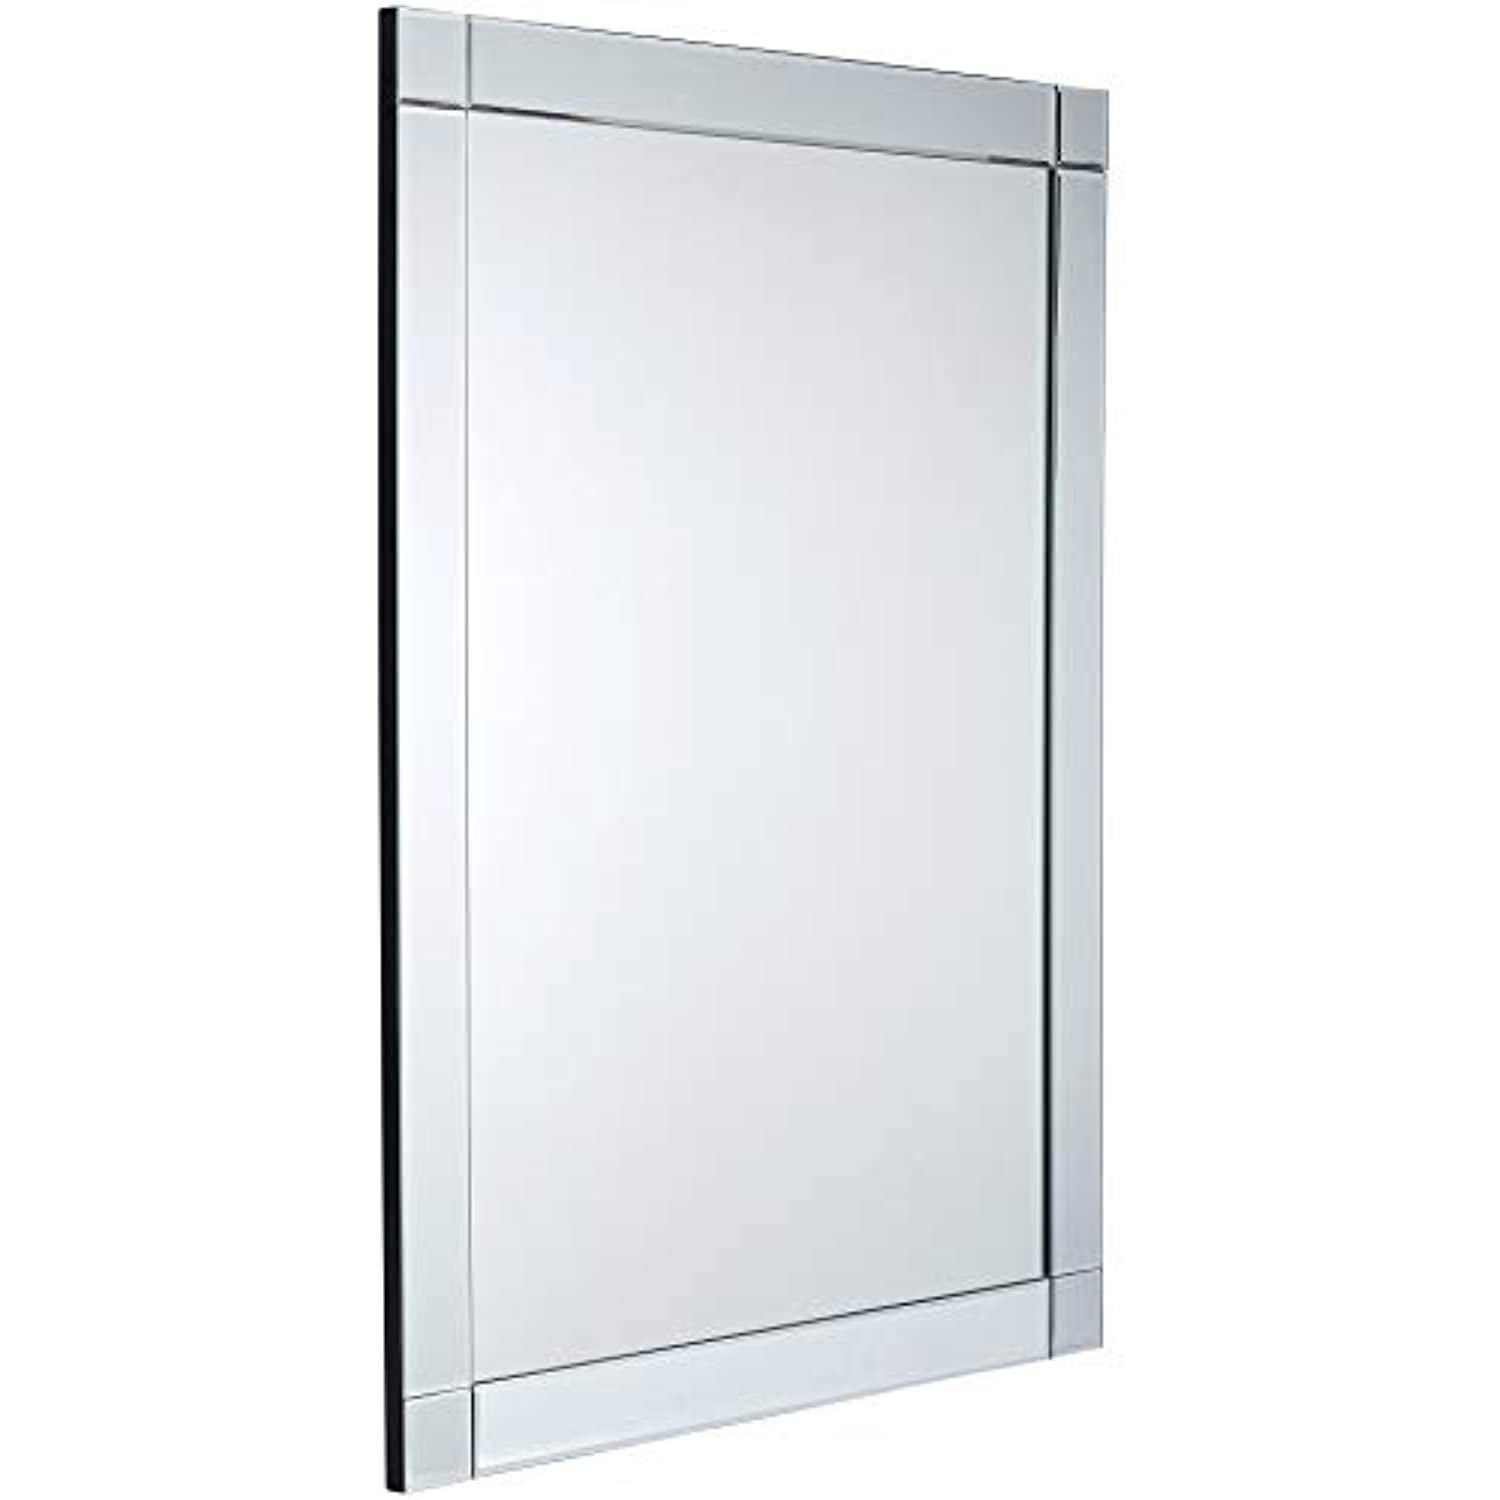 Hallway or Entry Modern & Classy Accent Decor for Vanity Hangs Horizontal 20x30 Wall Rectangular Mirror with Beveled Edge Hamilton Hills Large Silver Mirror with Squared Corner Frame Bathroom